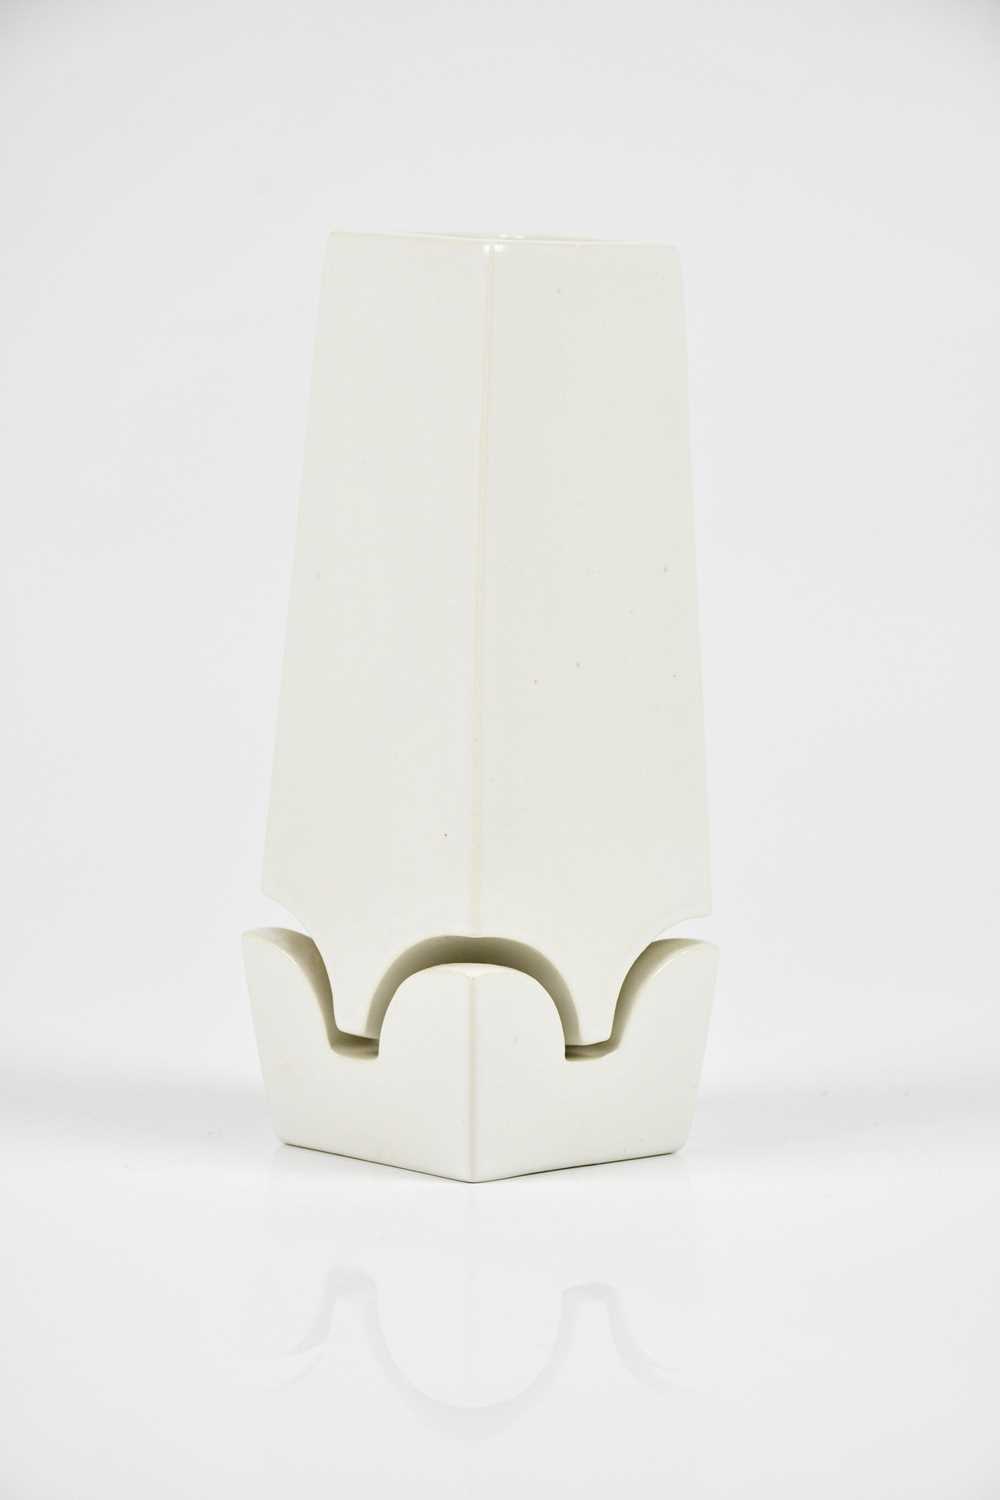 ALISON BRIGDEN FOR TROIKA POTTERY; a white glazed floating vase, signed Troika, with painted - Image 3 of 4